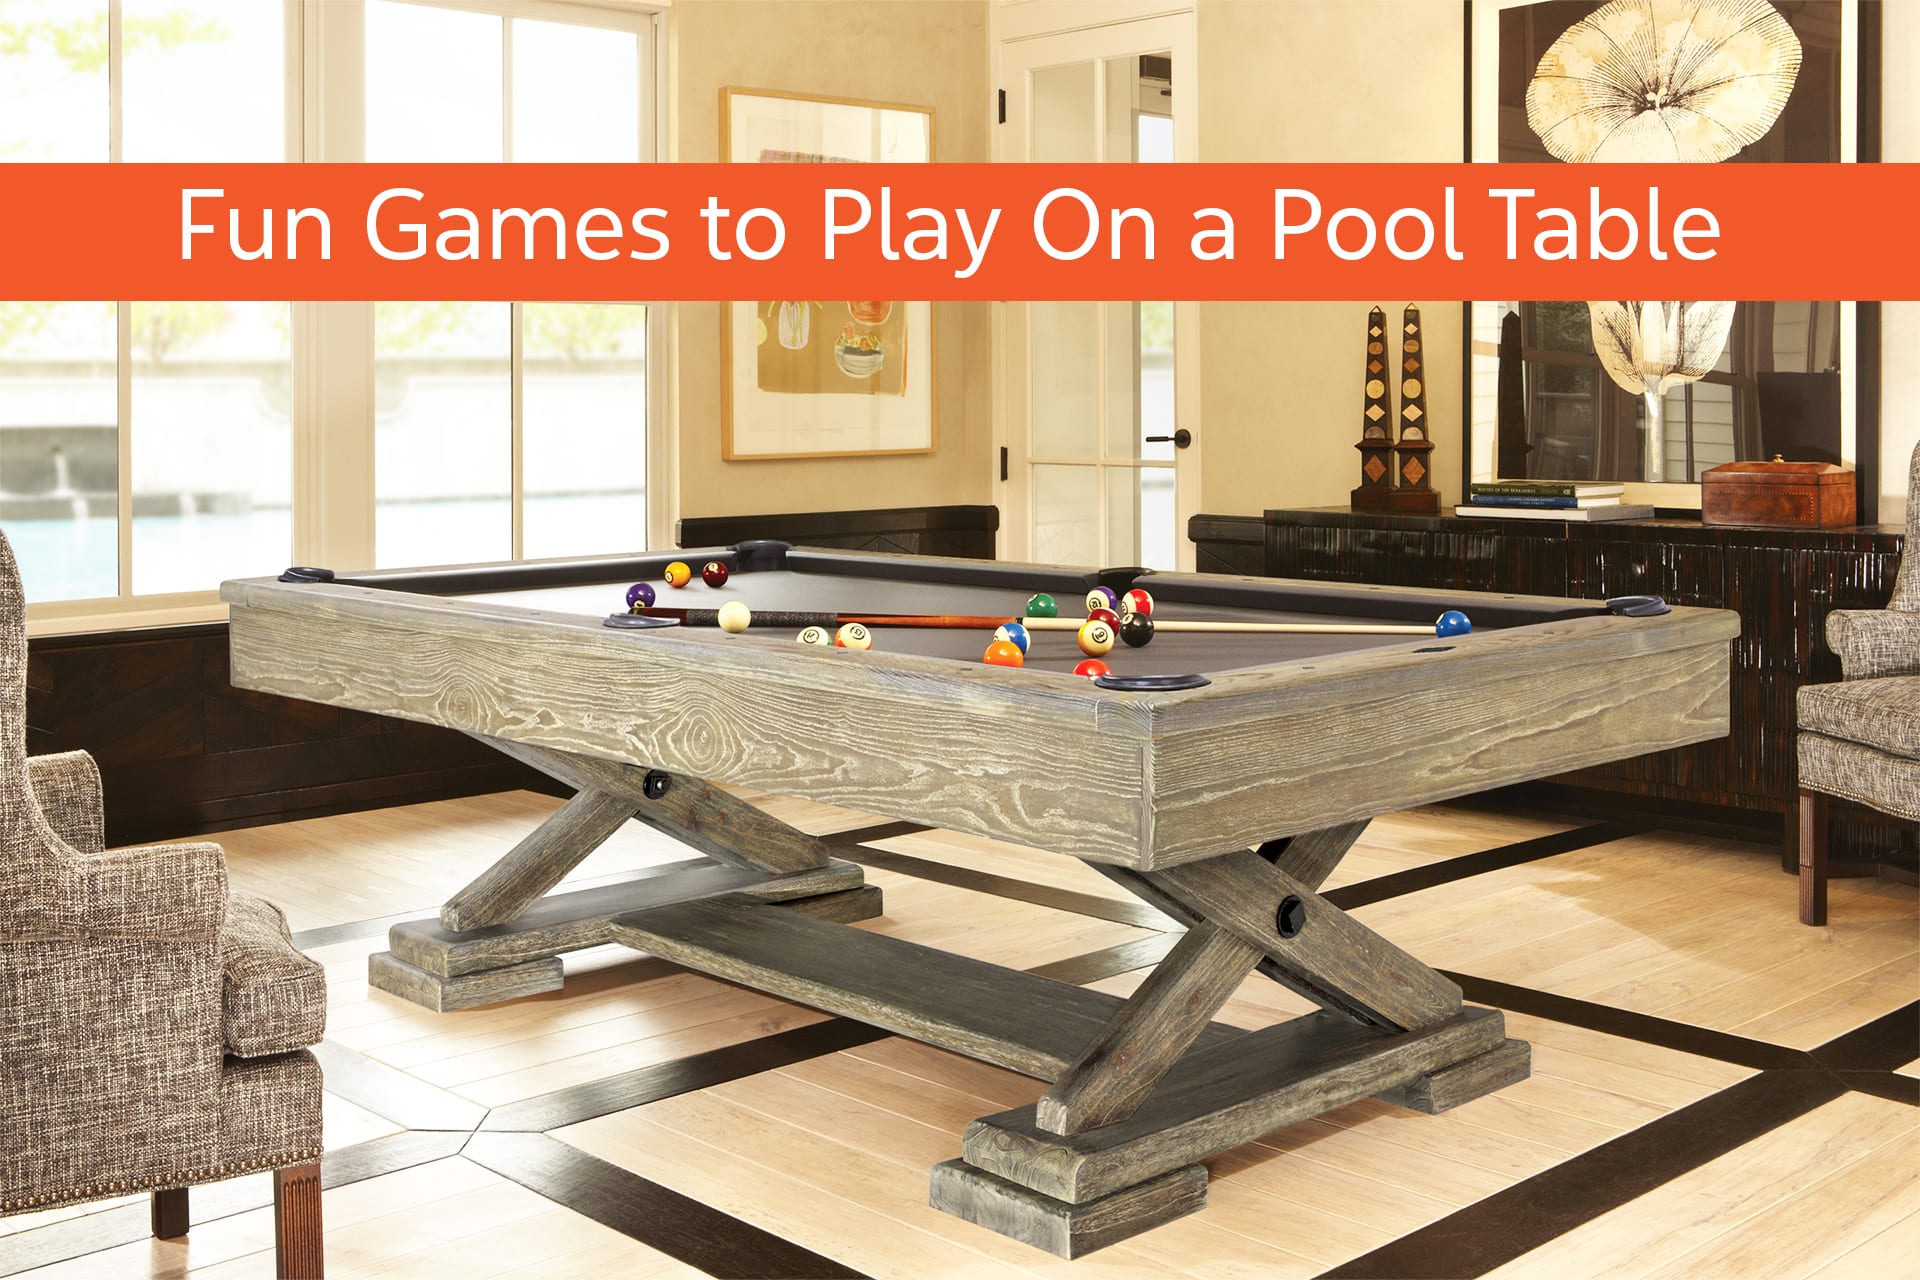 Fun Games To Play on a Pool Table